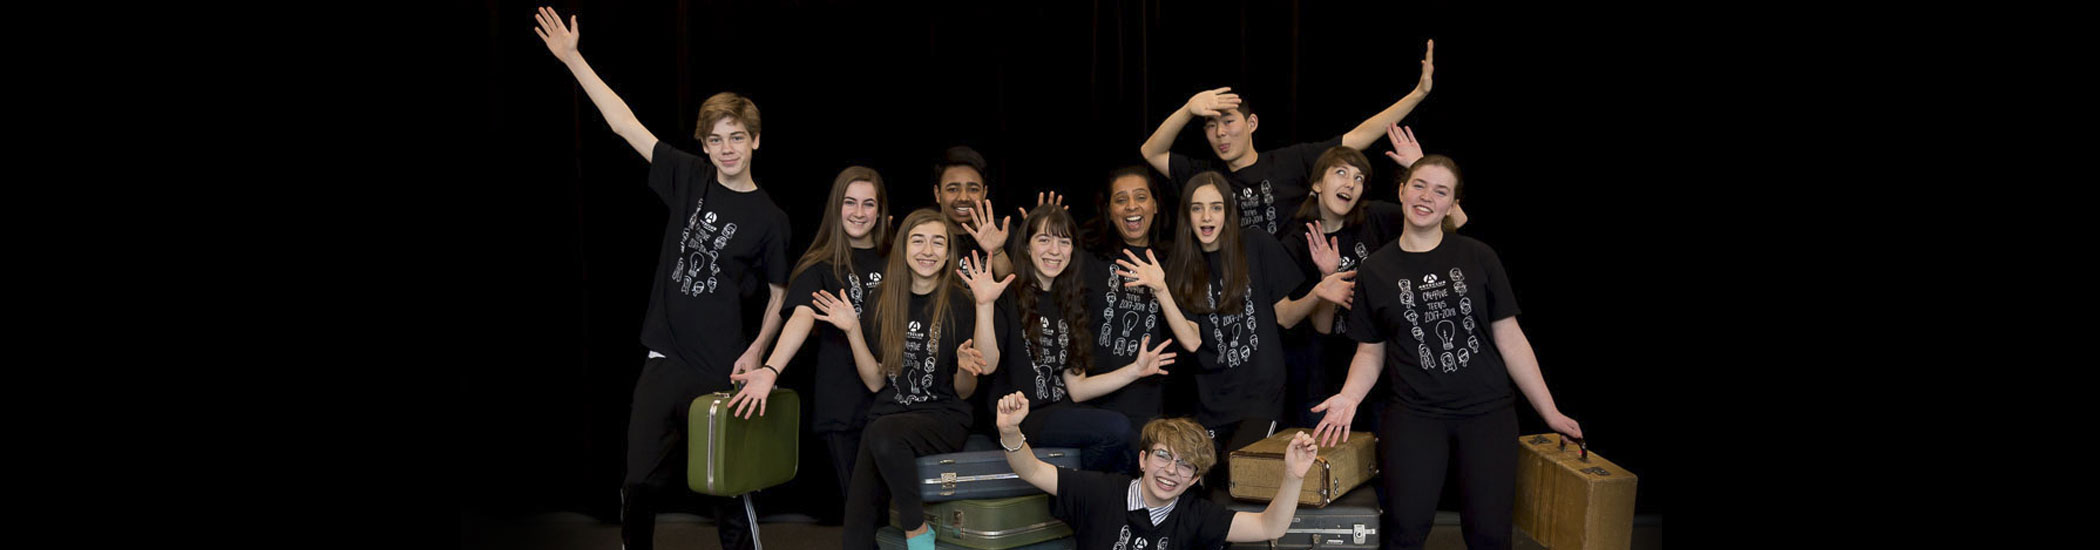 Photo of a group of teens posed around old-fashioned prop luggage and doing jazz hands.